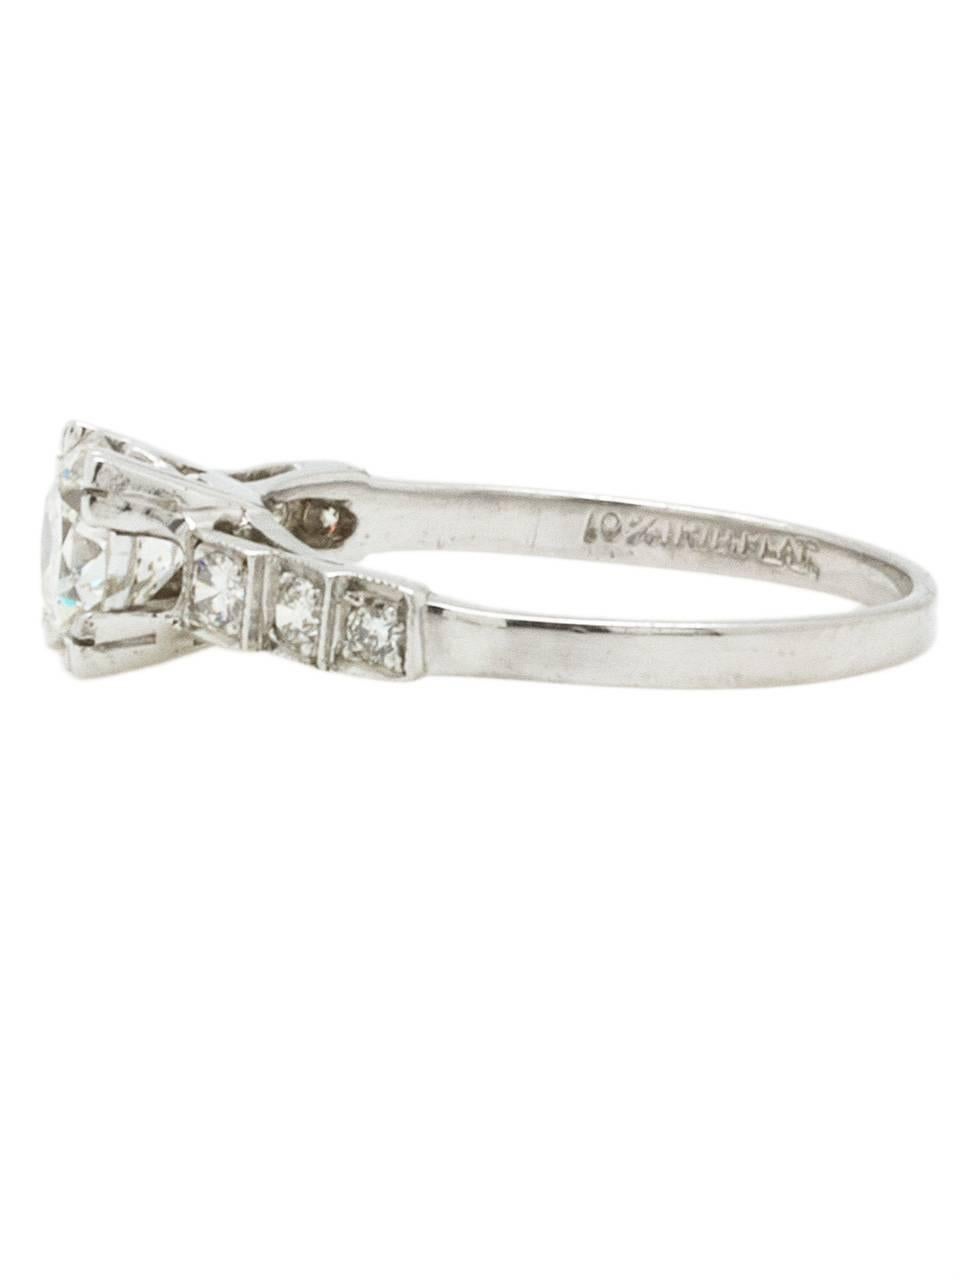 1930s Vintage Diamond Engagement Ring Platinum 0.77 Carat Round Brilliant F-VS1 In Excellent Condition For Sale In West Hollywood, CA